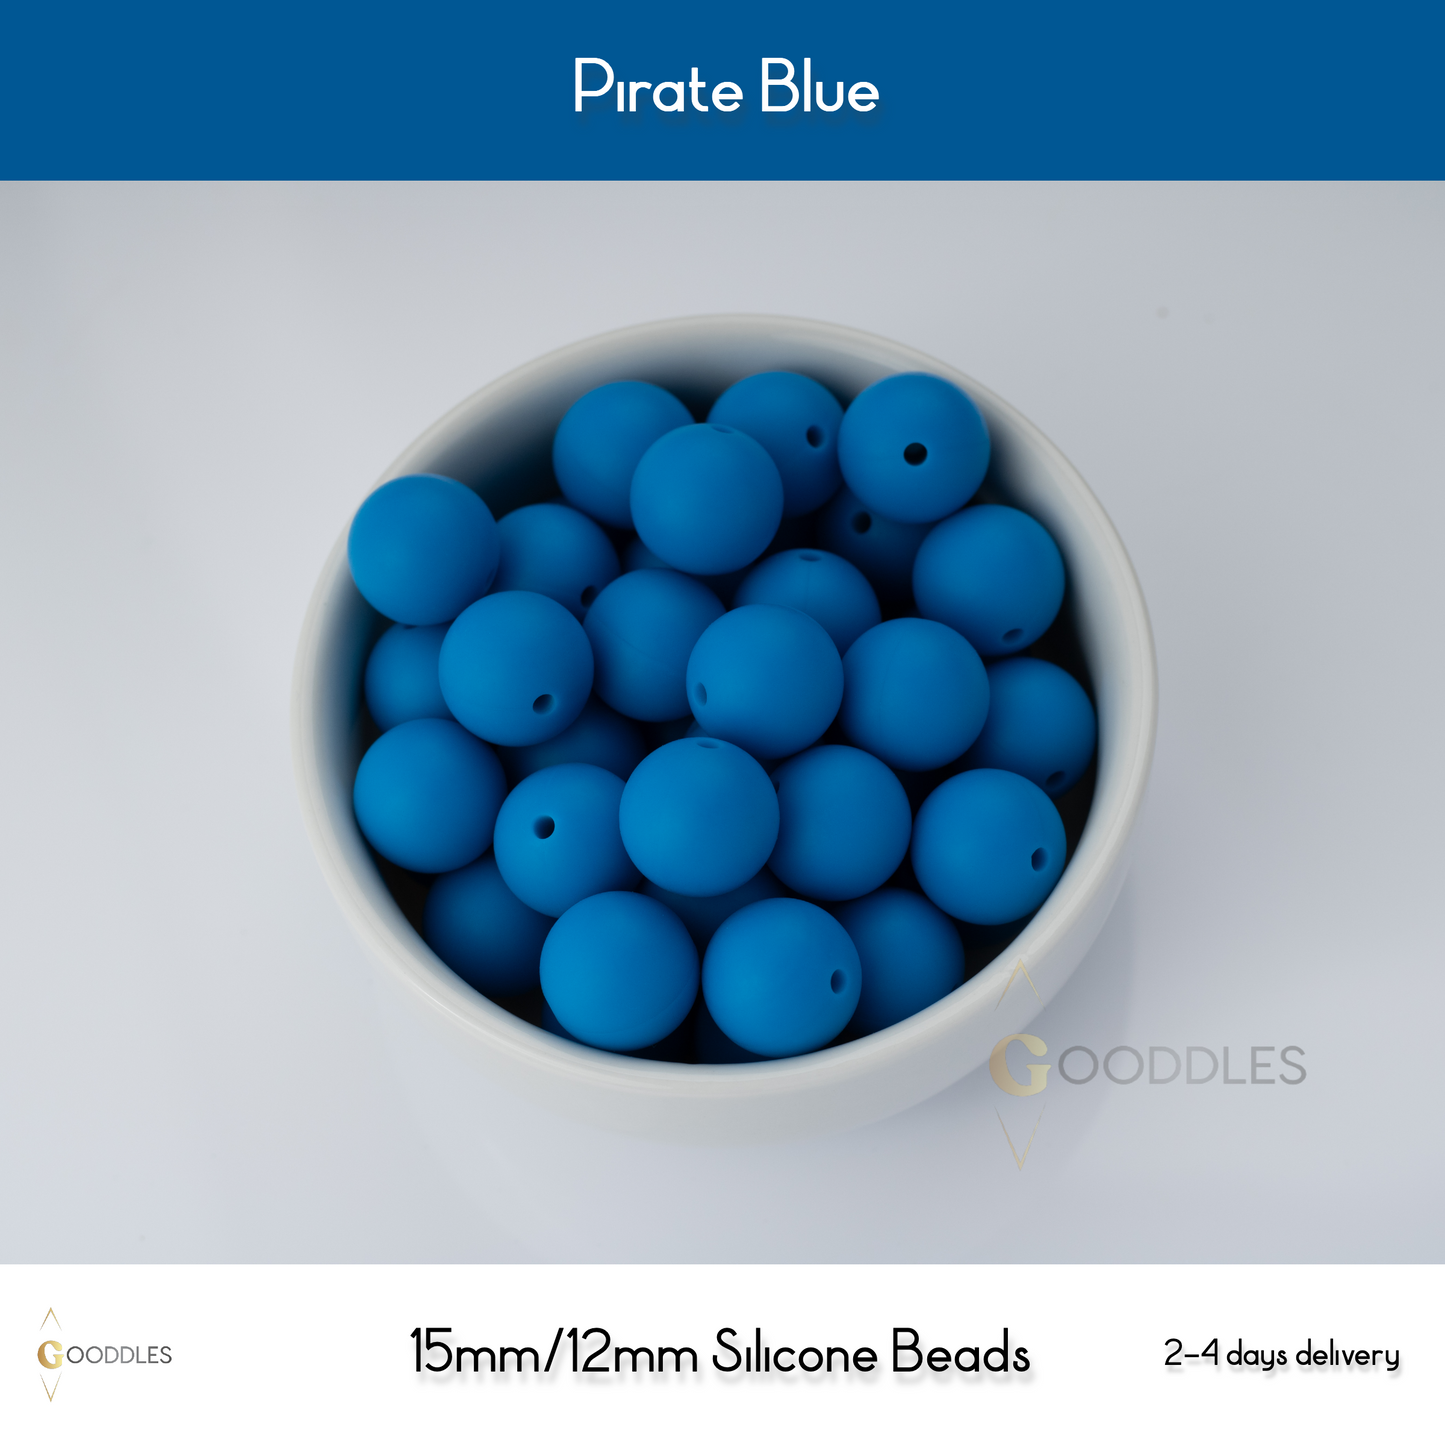 5pcs, Pirate Blue Silicone Beads Round Silicone Beads